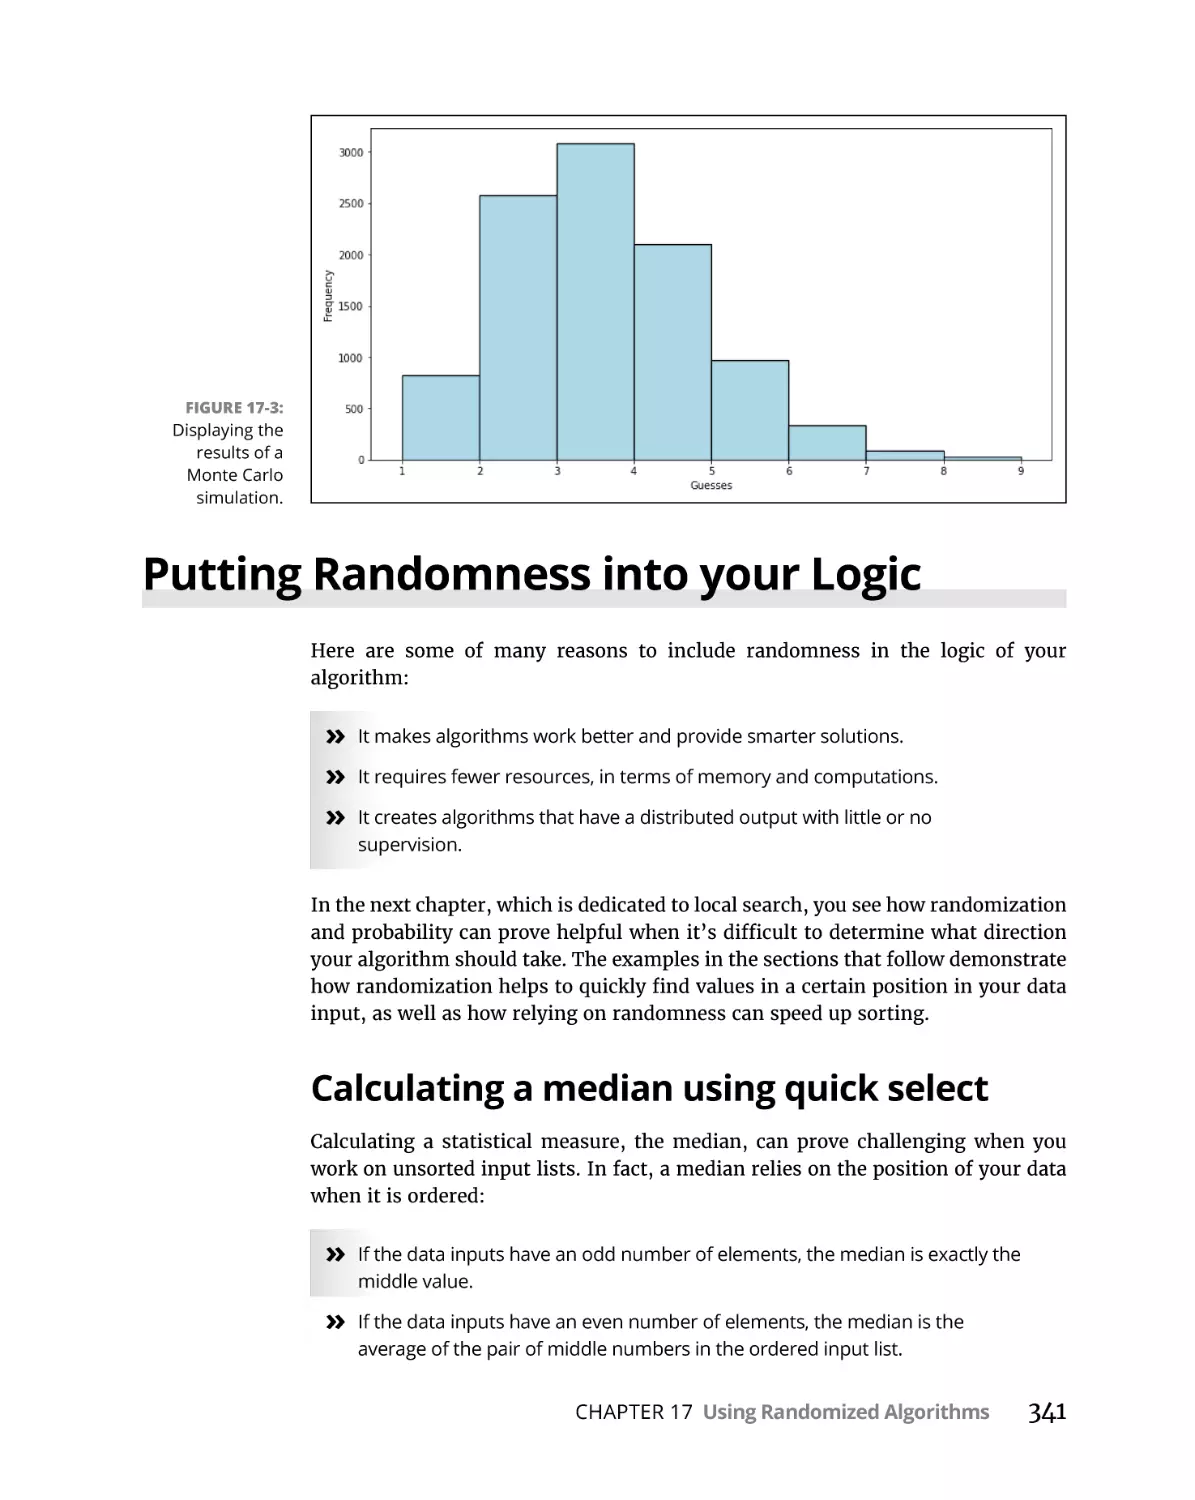 Putting Randomness into your Logic
Calculating a median using quick select